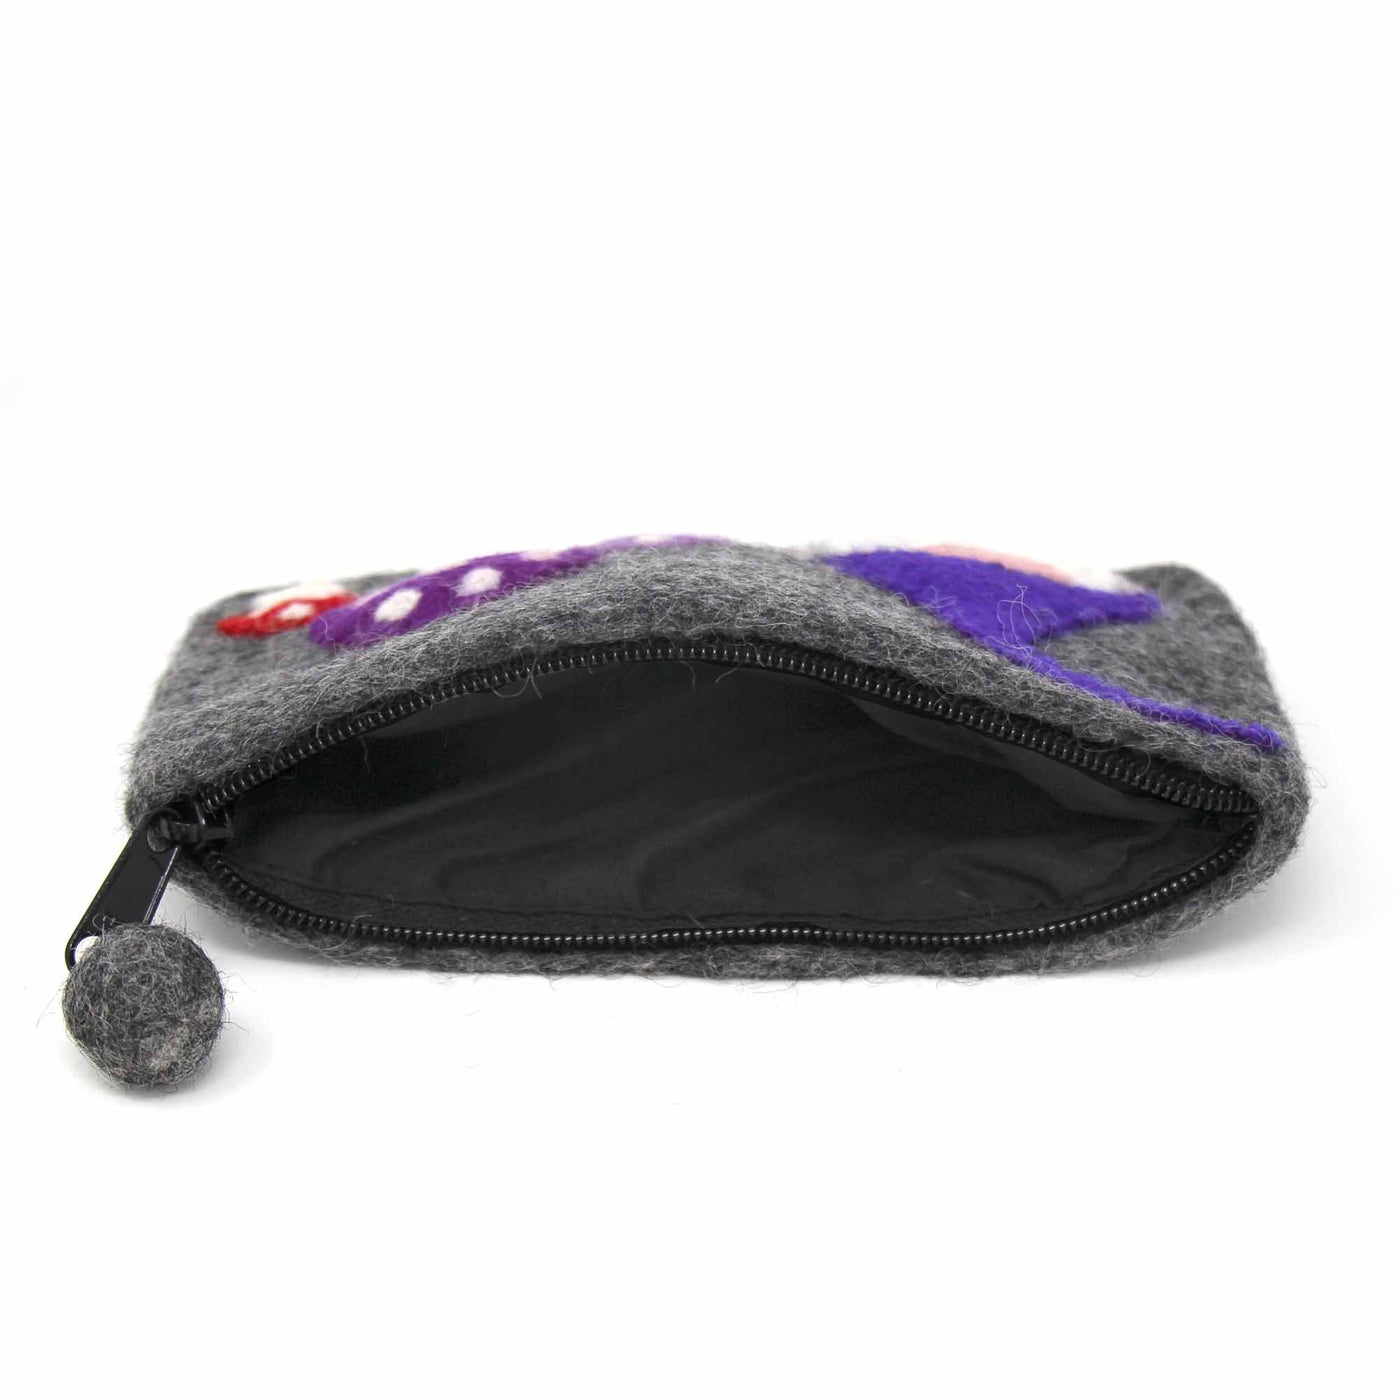 Hand Crafted Felt: Gnome and Mushroom Pouch - Yvonne’s 100th Wish Inc